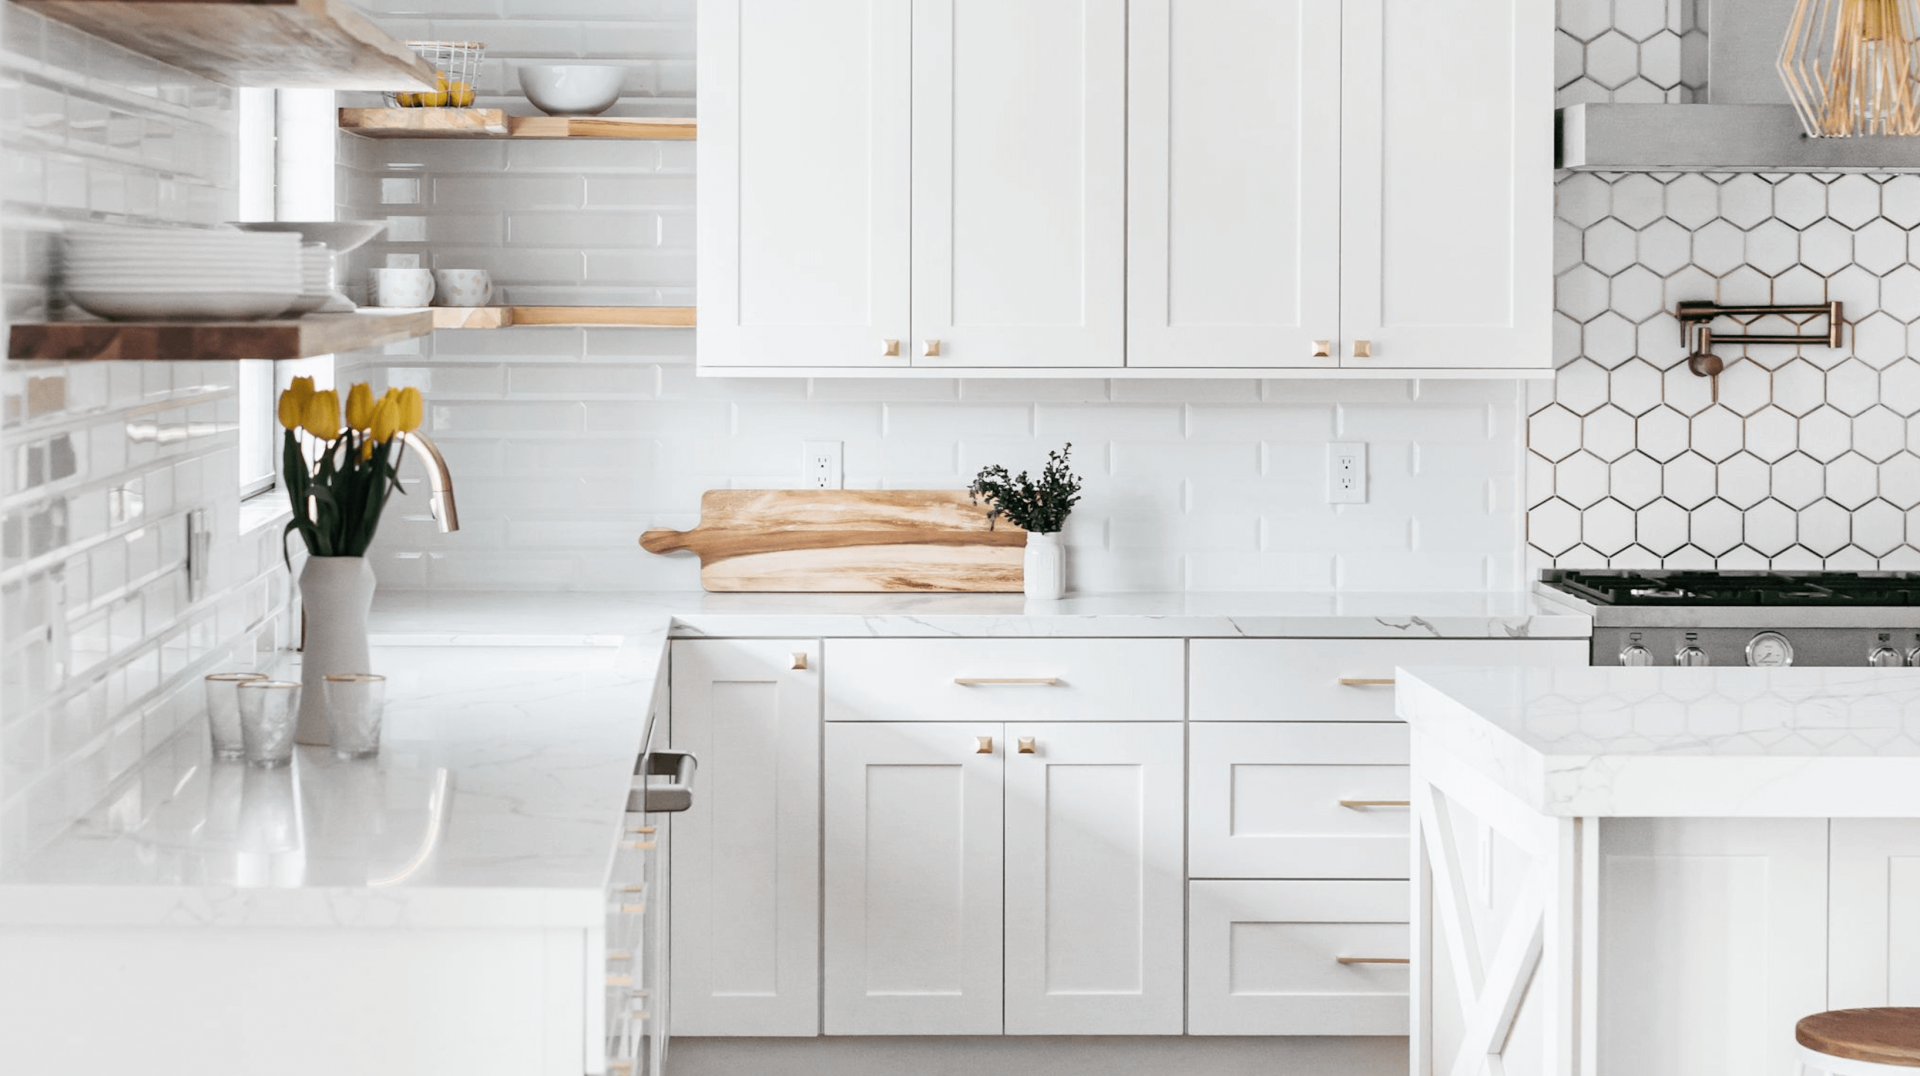 What Is The Most Durable Finish For Kitchen Cabinets?